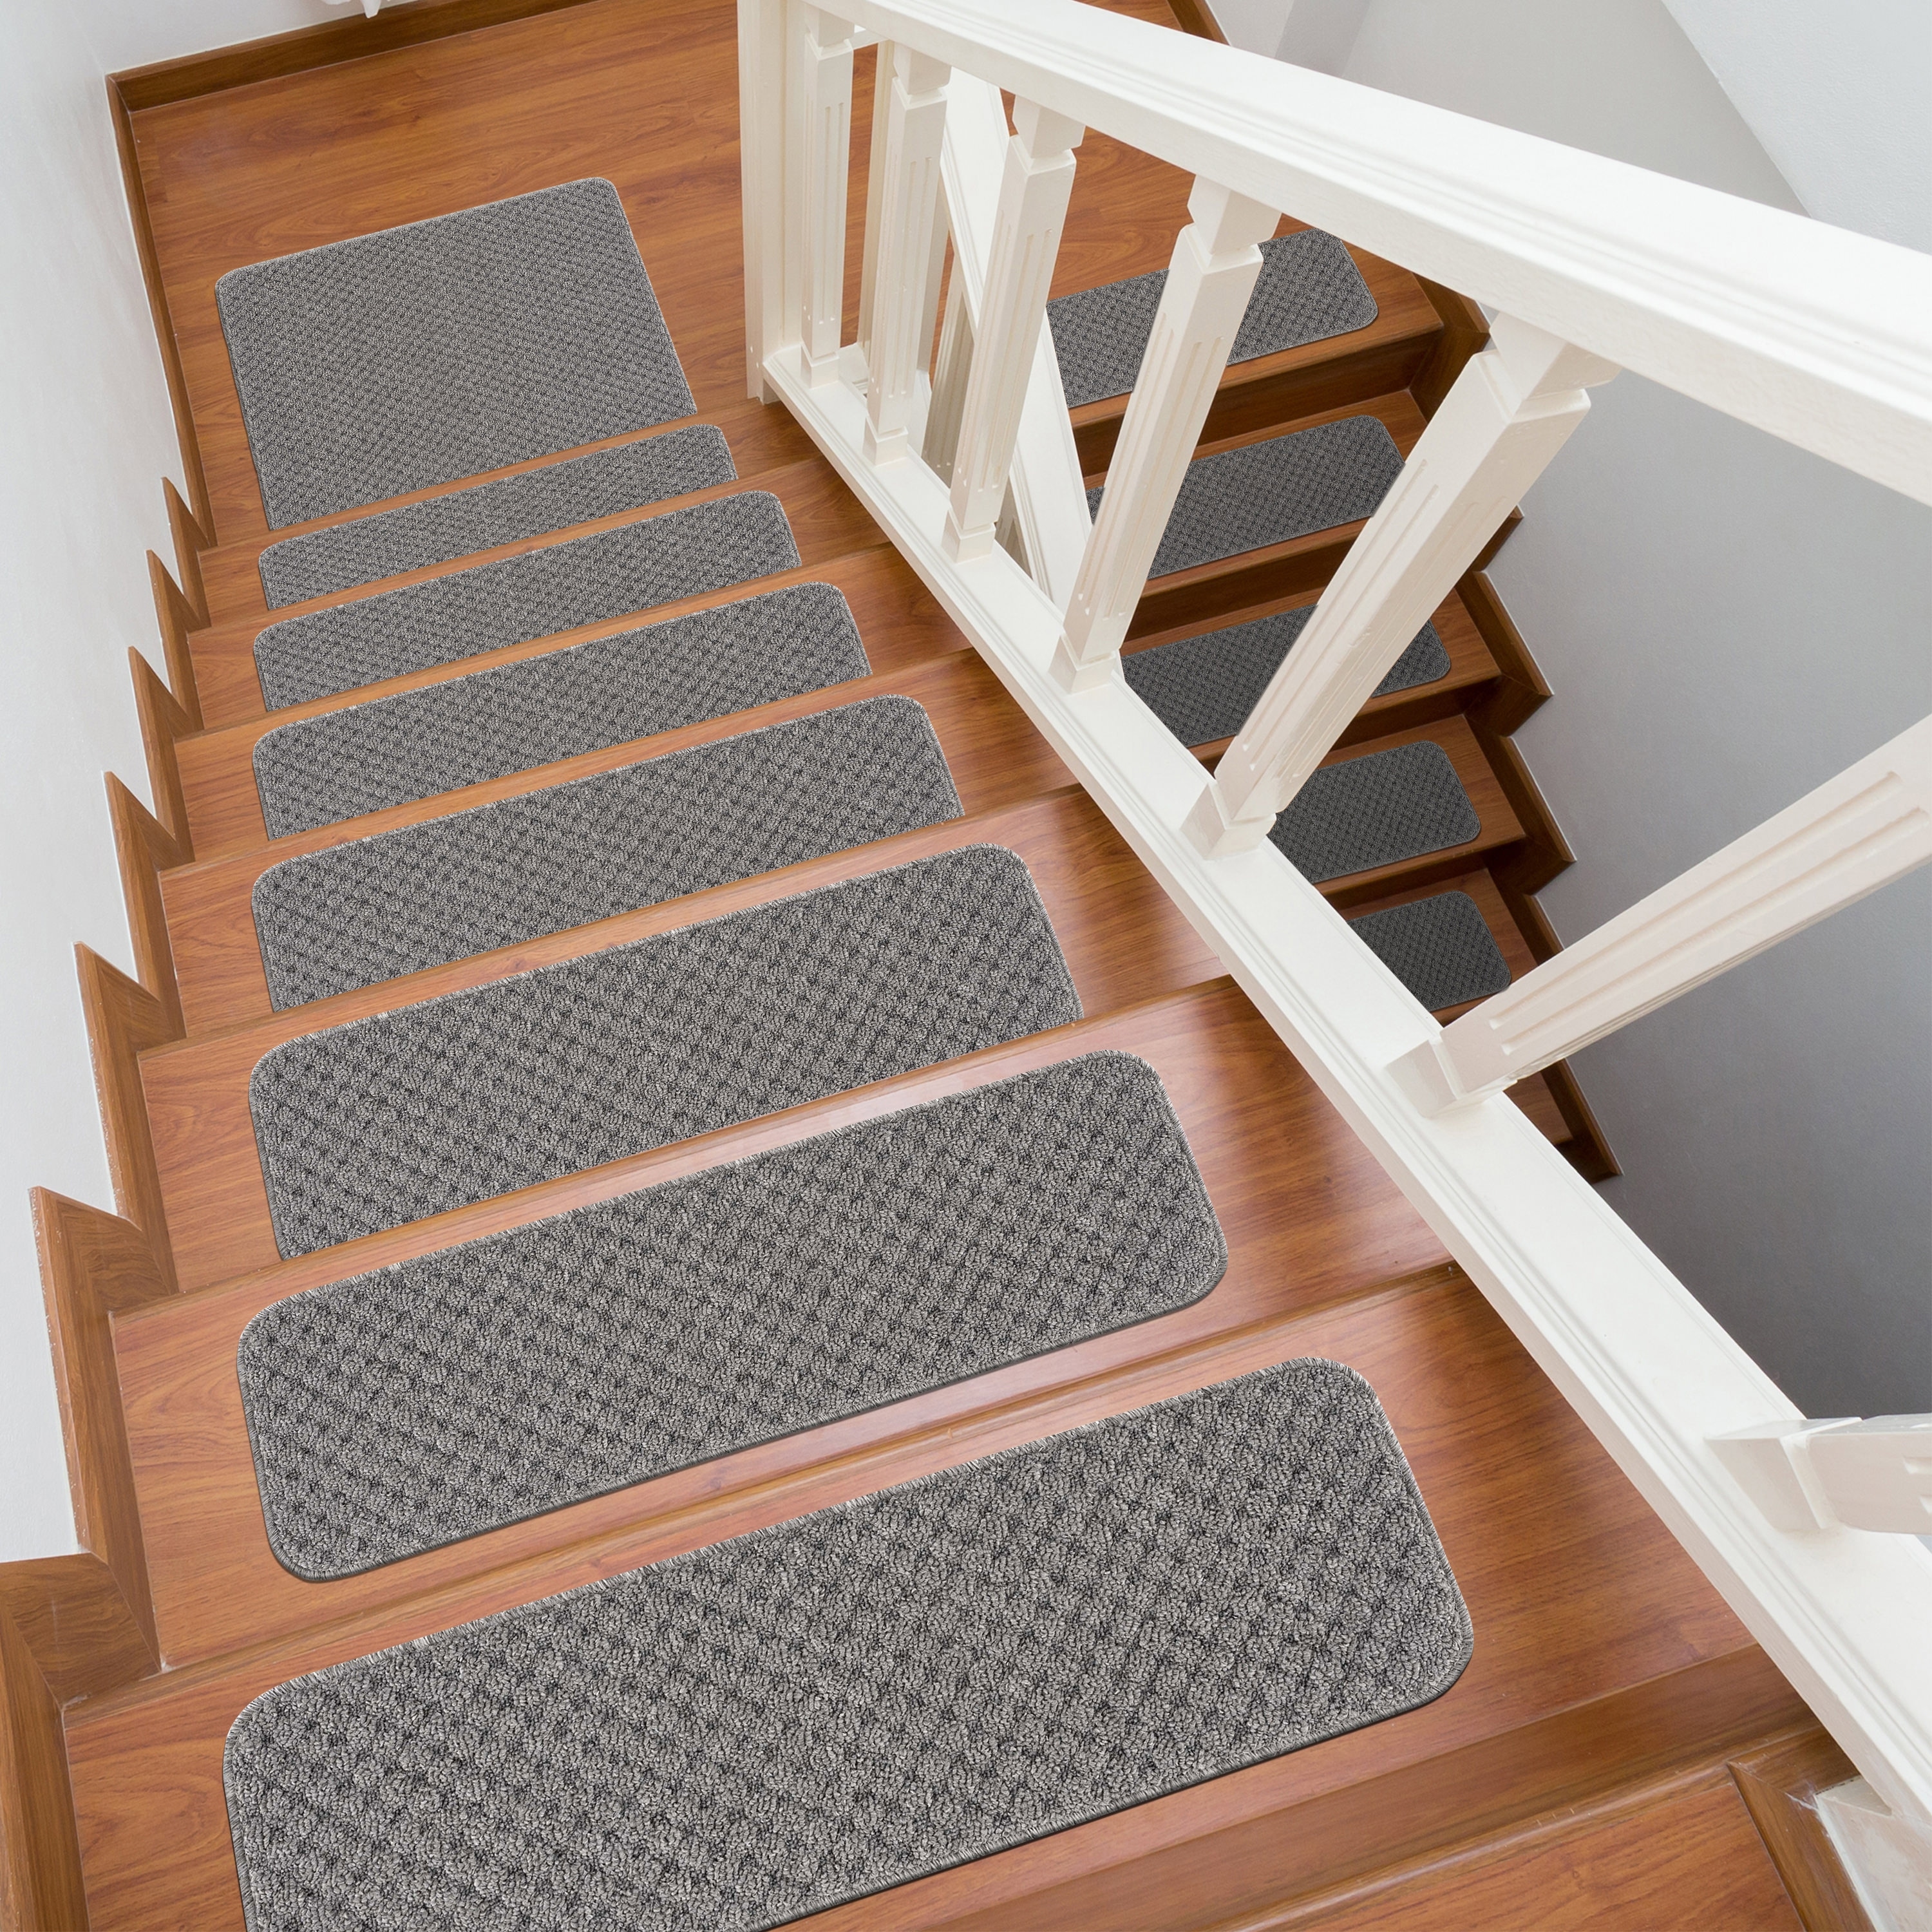 https://ak1.ostkcdn.com/images/products/is/images/direct/79518aeaba5b04deff87f8a6513966bcde56d19f/Beverly-Rug-Non-Slip-Stair-Treads-for-Wooden-Steps-w--Matching-Landing-Mat-Set.jpg